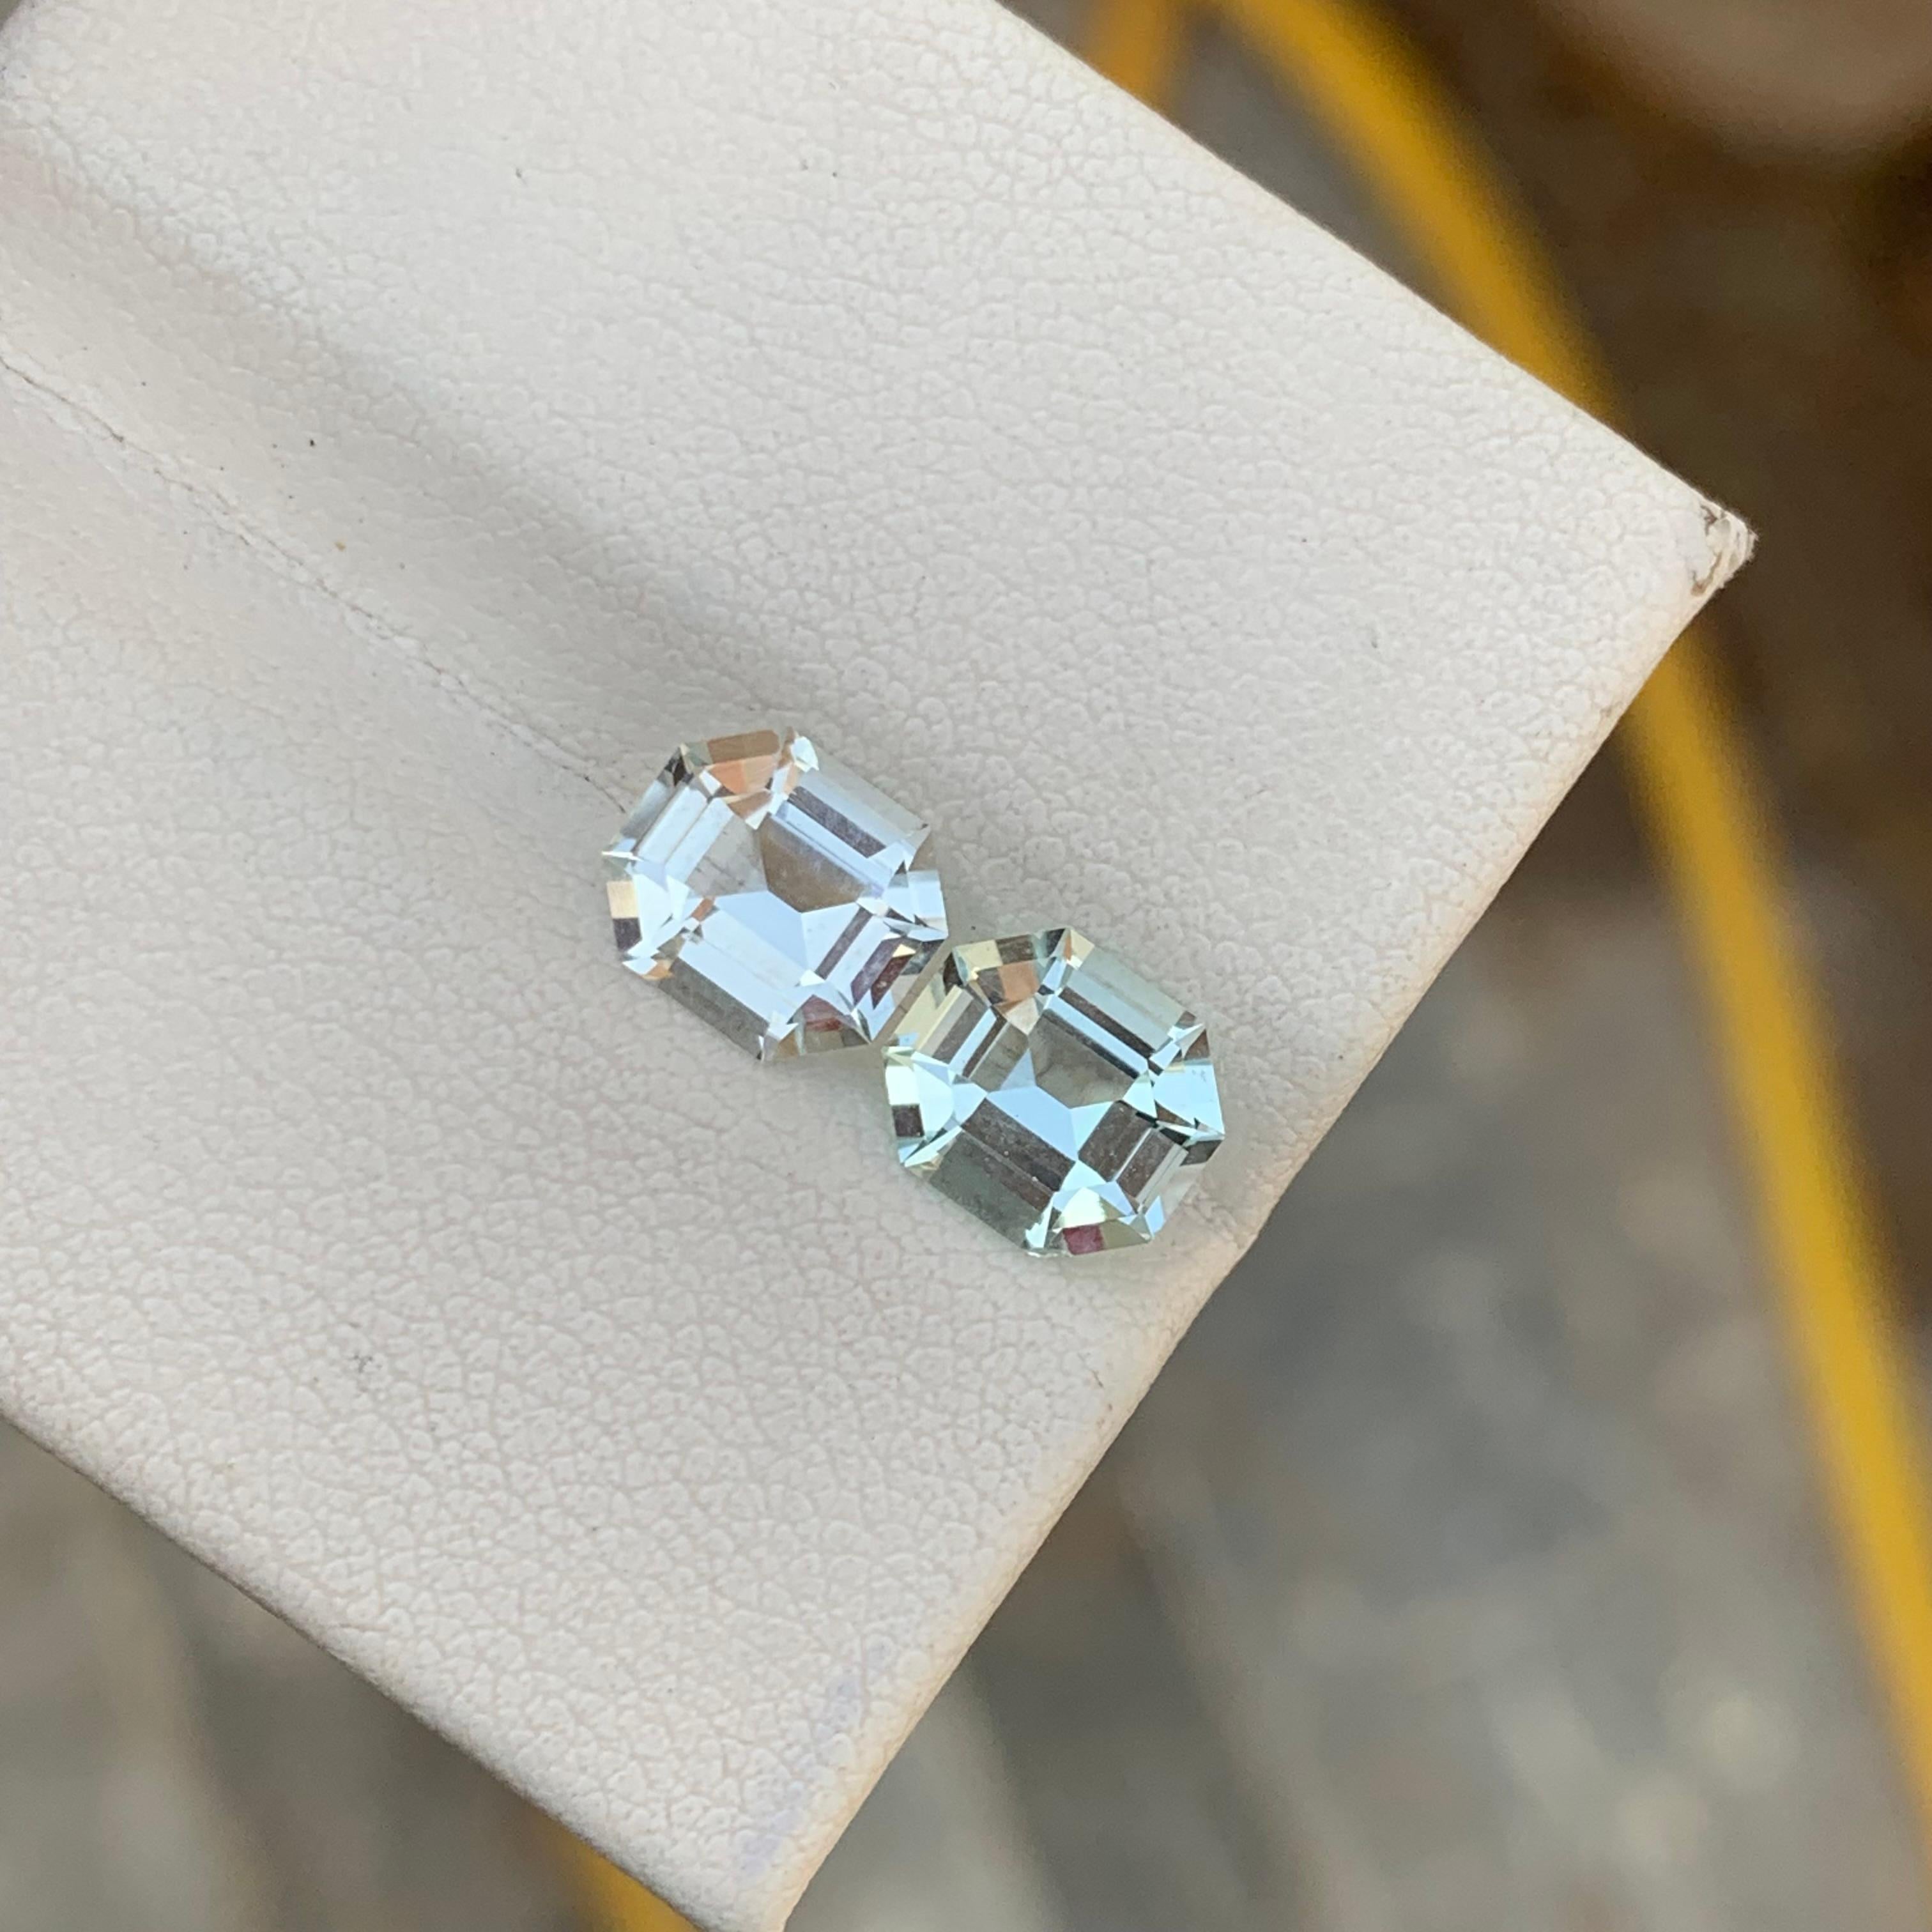 Gorgeous Natural Loose Aquamarine Pair For Earrings Jewelry 3.05 Carats  4